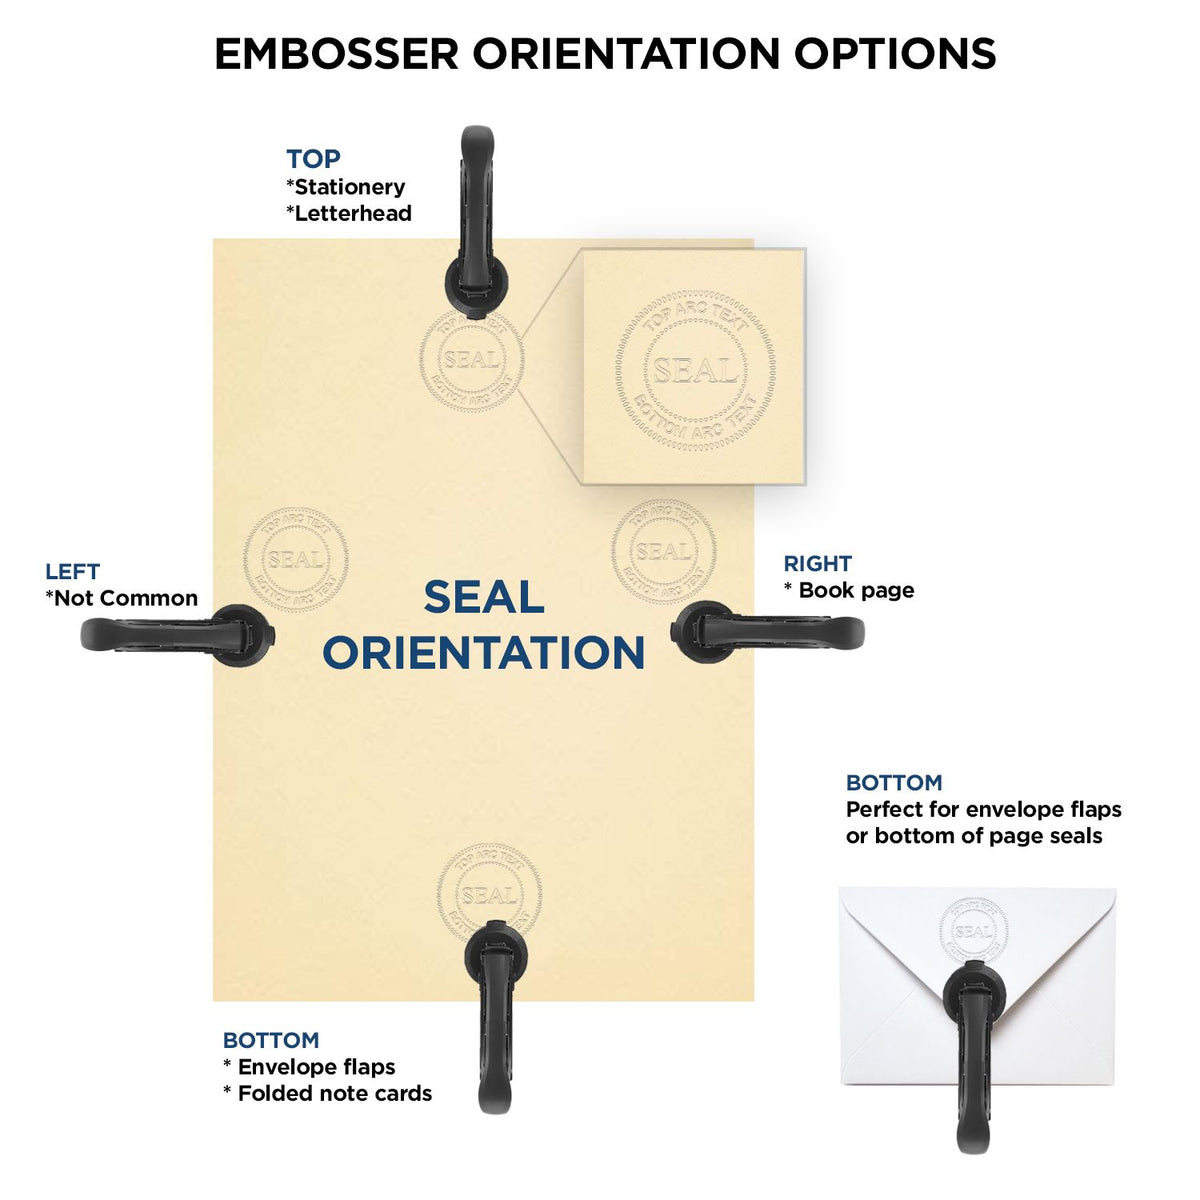 An infographic for the Heavy Duty Cast Iron Hawaii Architect Embosser showing embosser orientation, this is showing examples of a top, bottom, right and left insert.